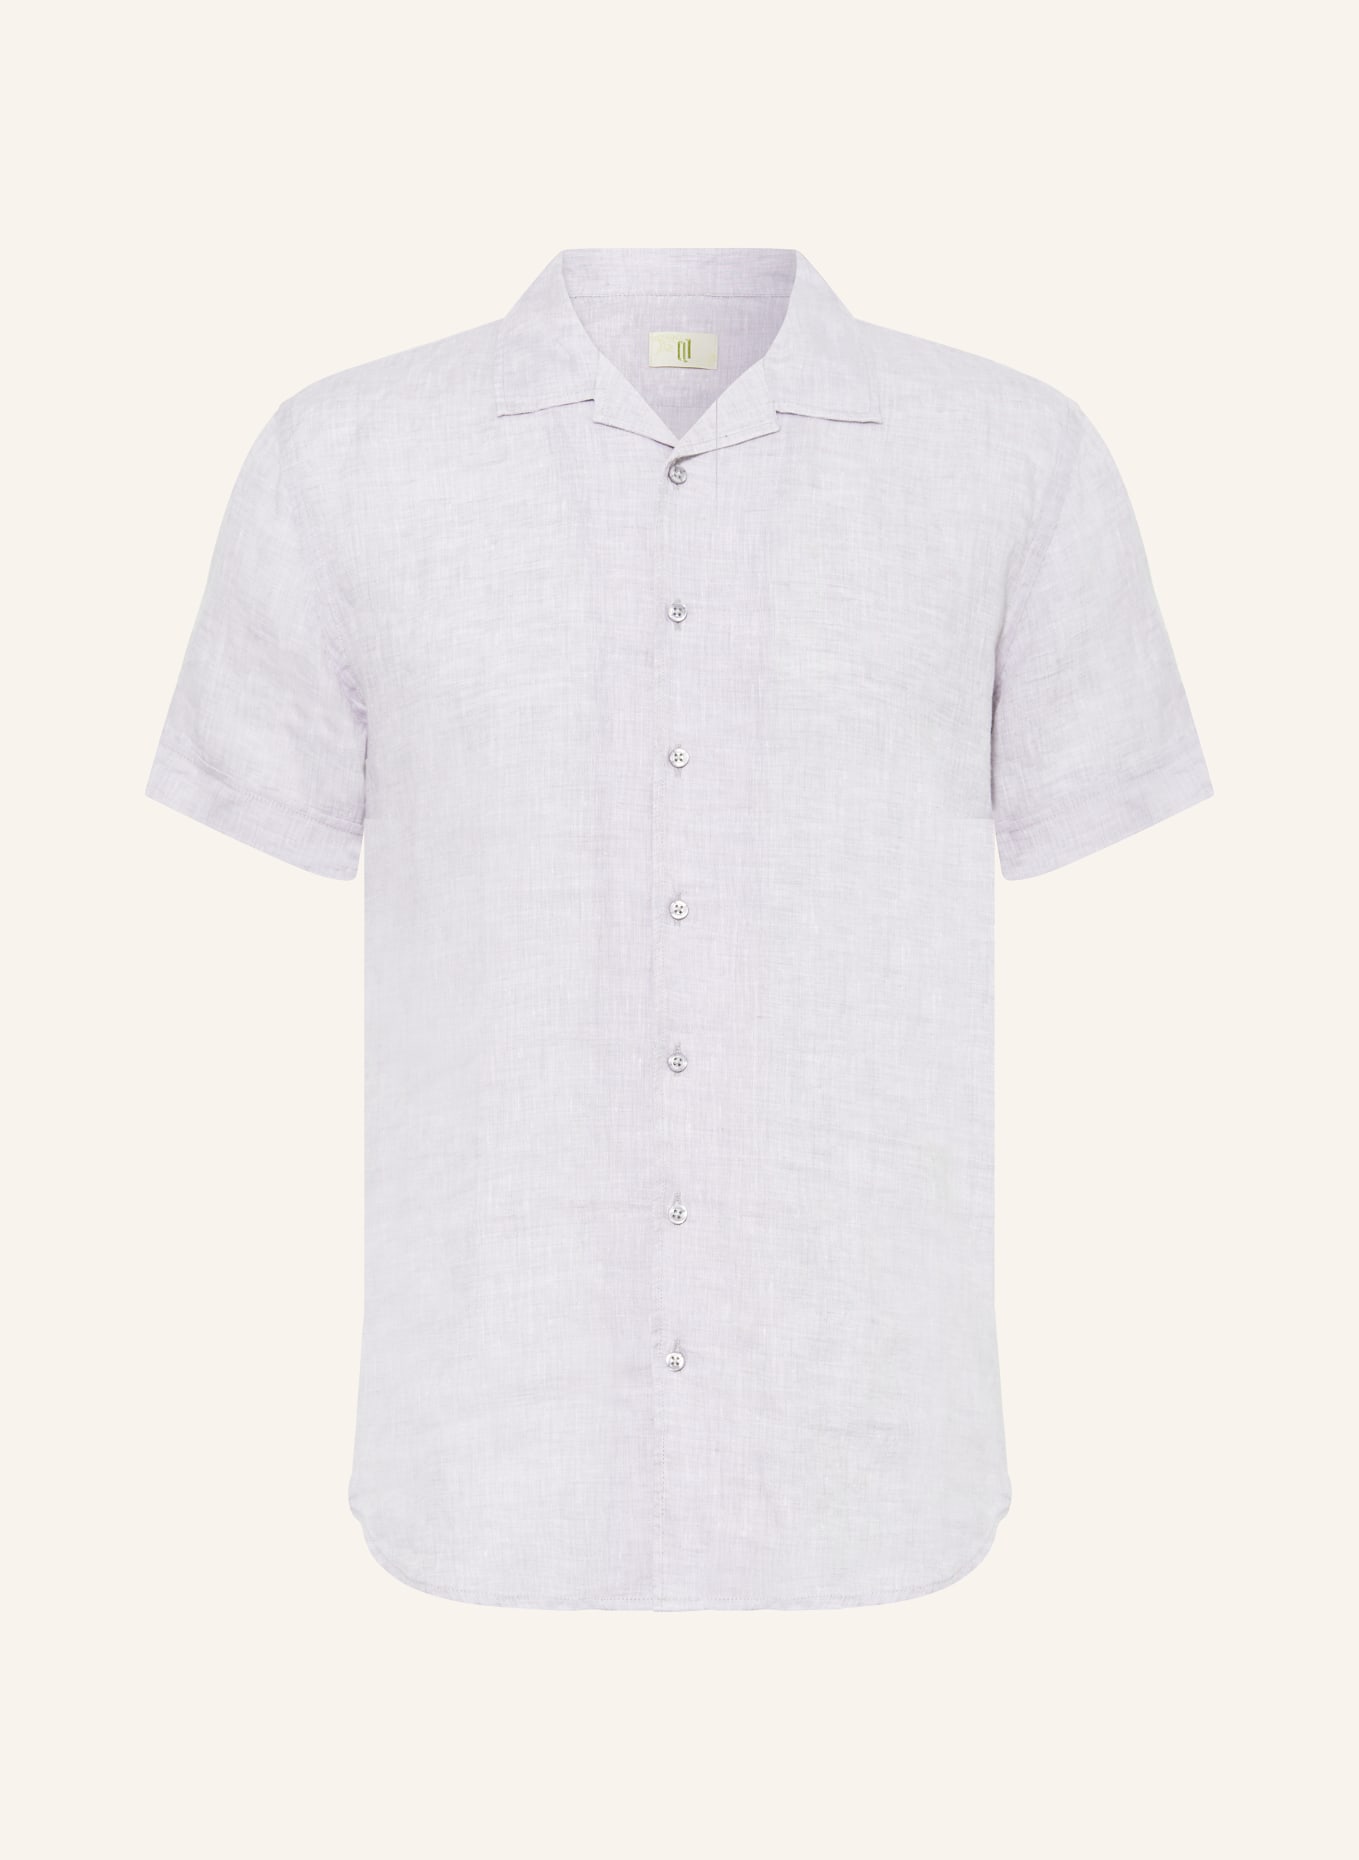 Q1 Manufaktur Resort shirt OLLY slim relaxed fit in linen, Color: GRAY (Image 1)